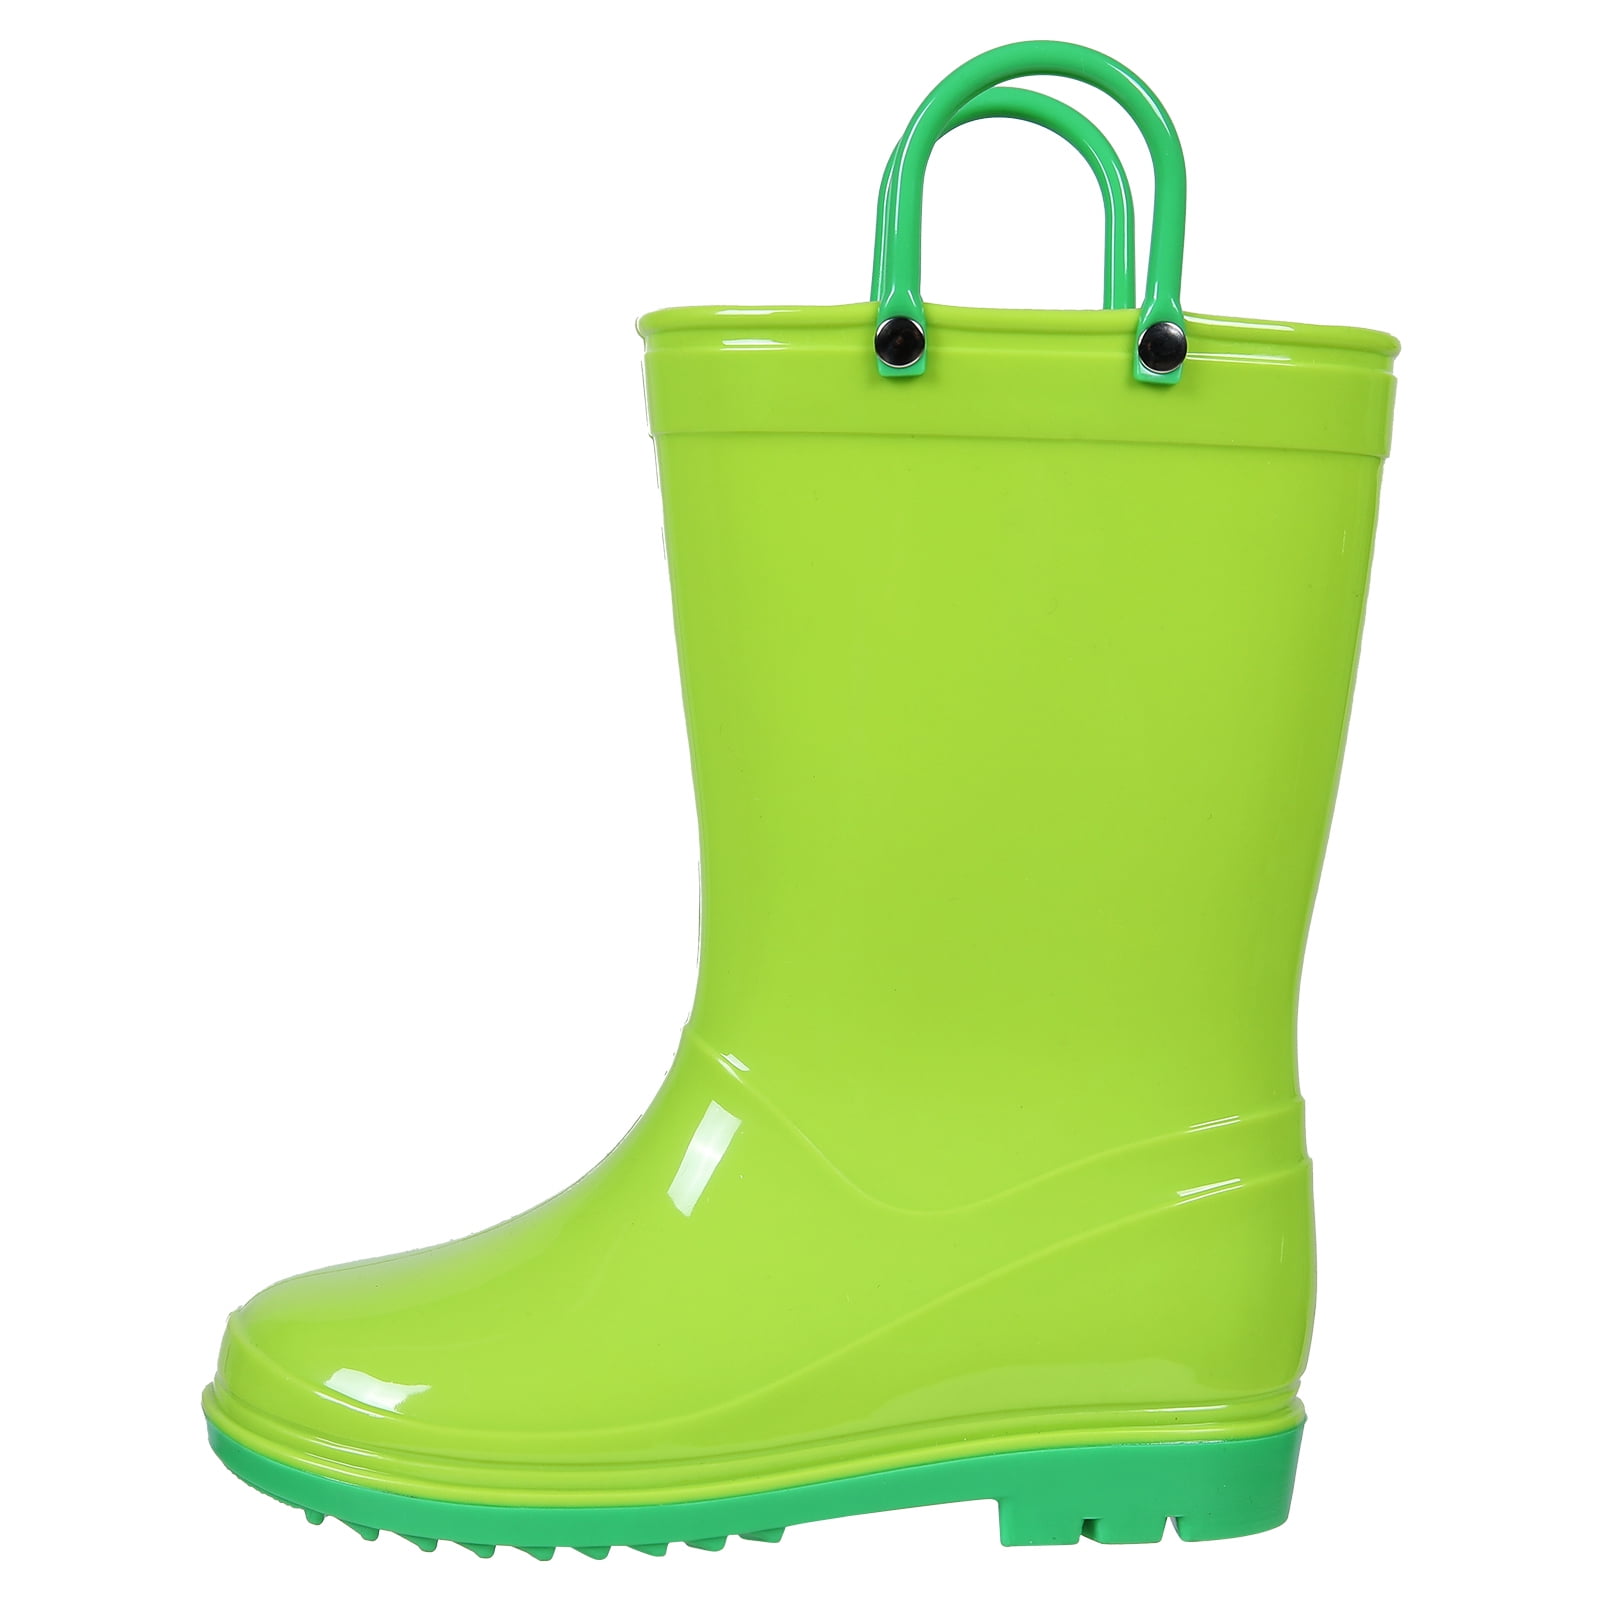 Girls Water Boot PVC Children Waterproof Shoes Toddlers rain Shoe with Easy-On Lightweight Kids Rain Boots for Boys